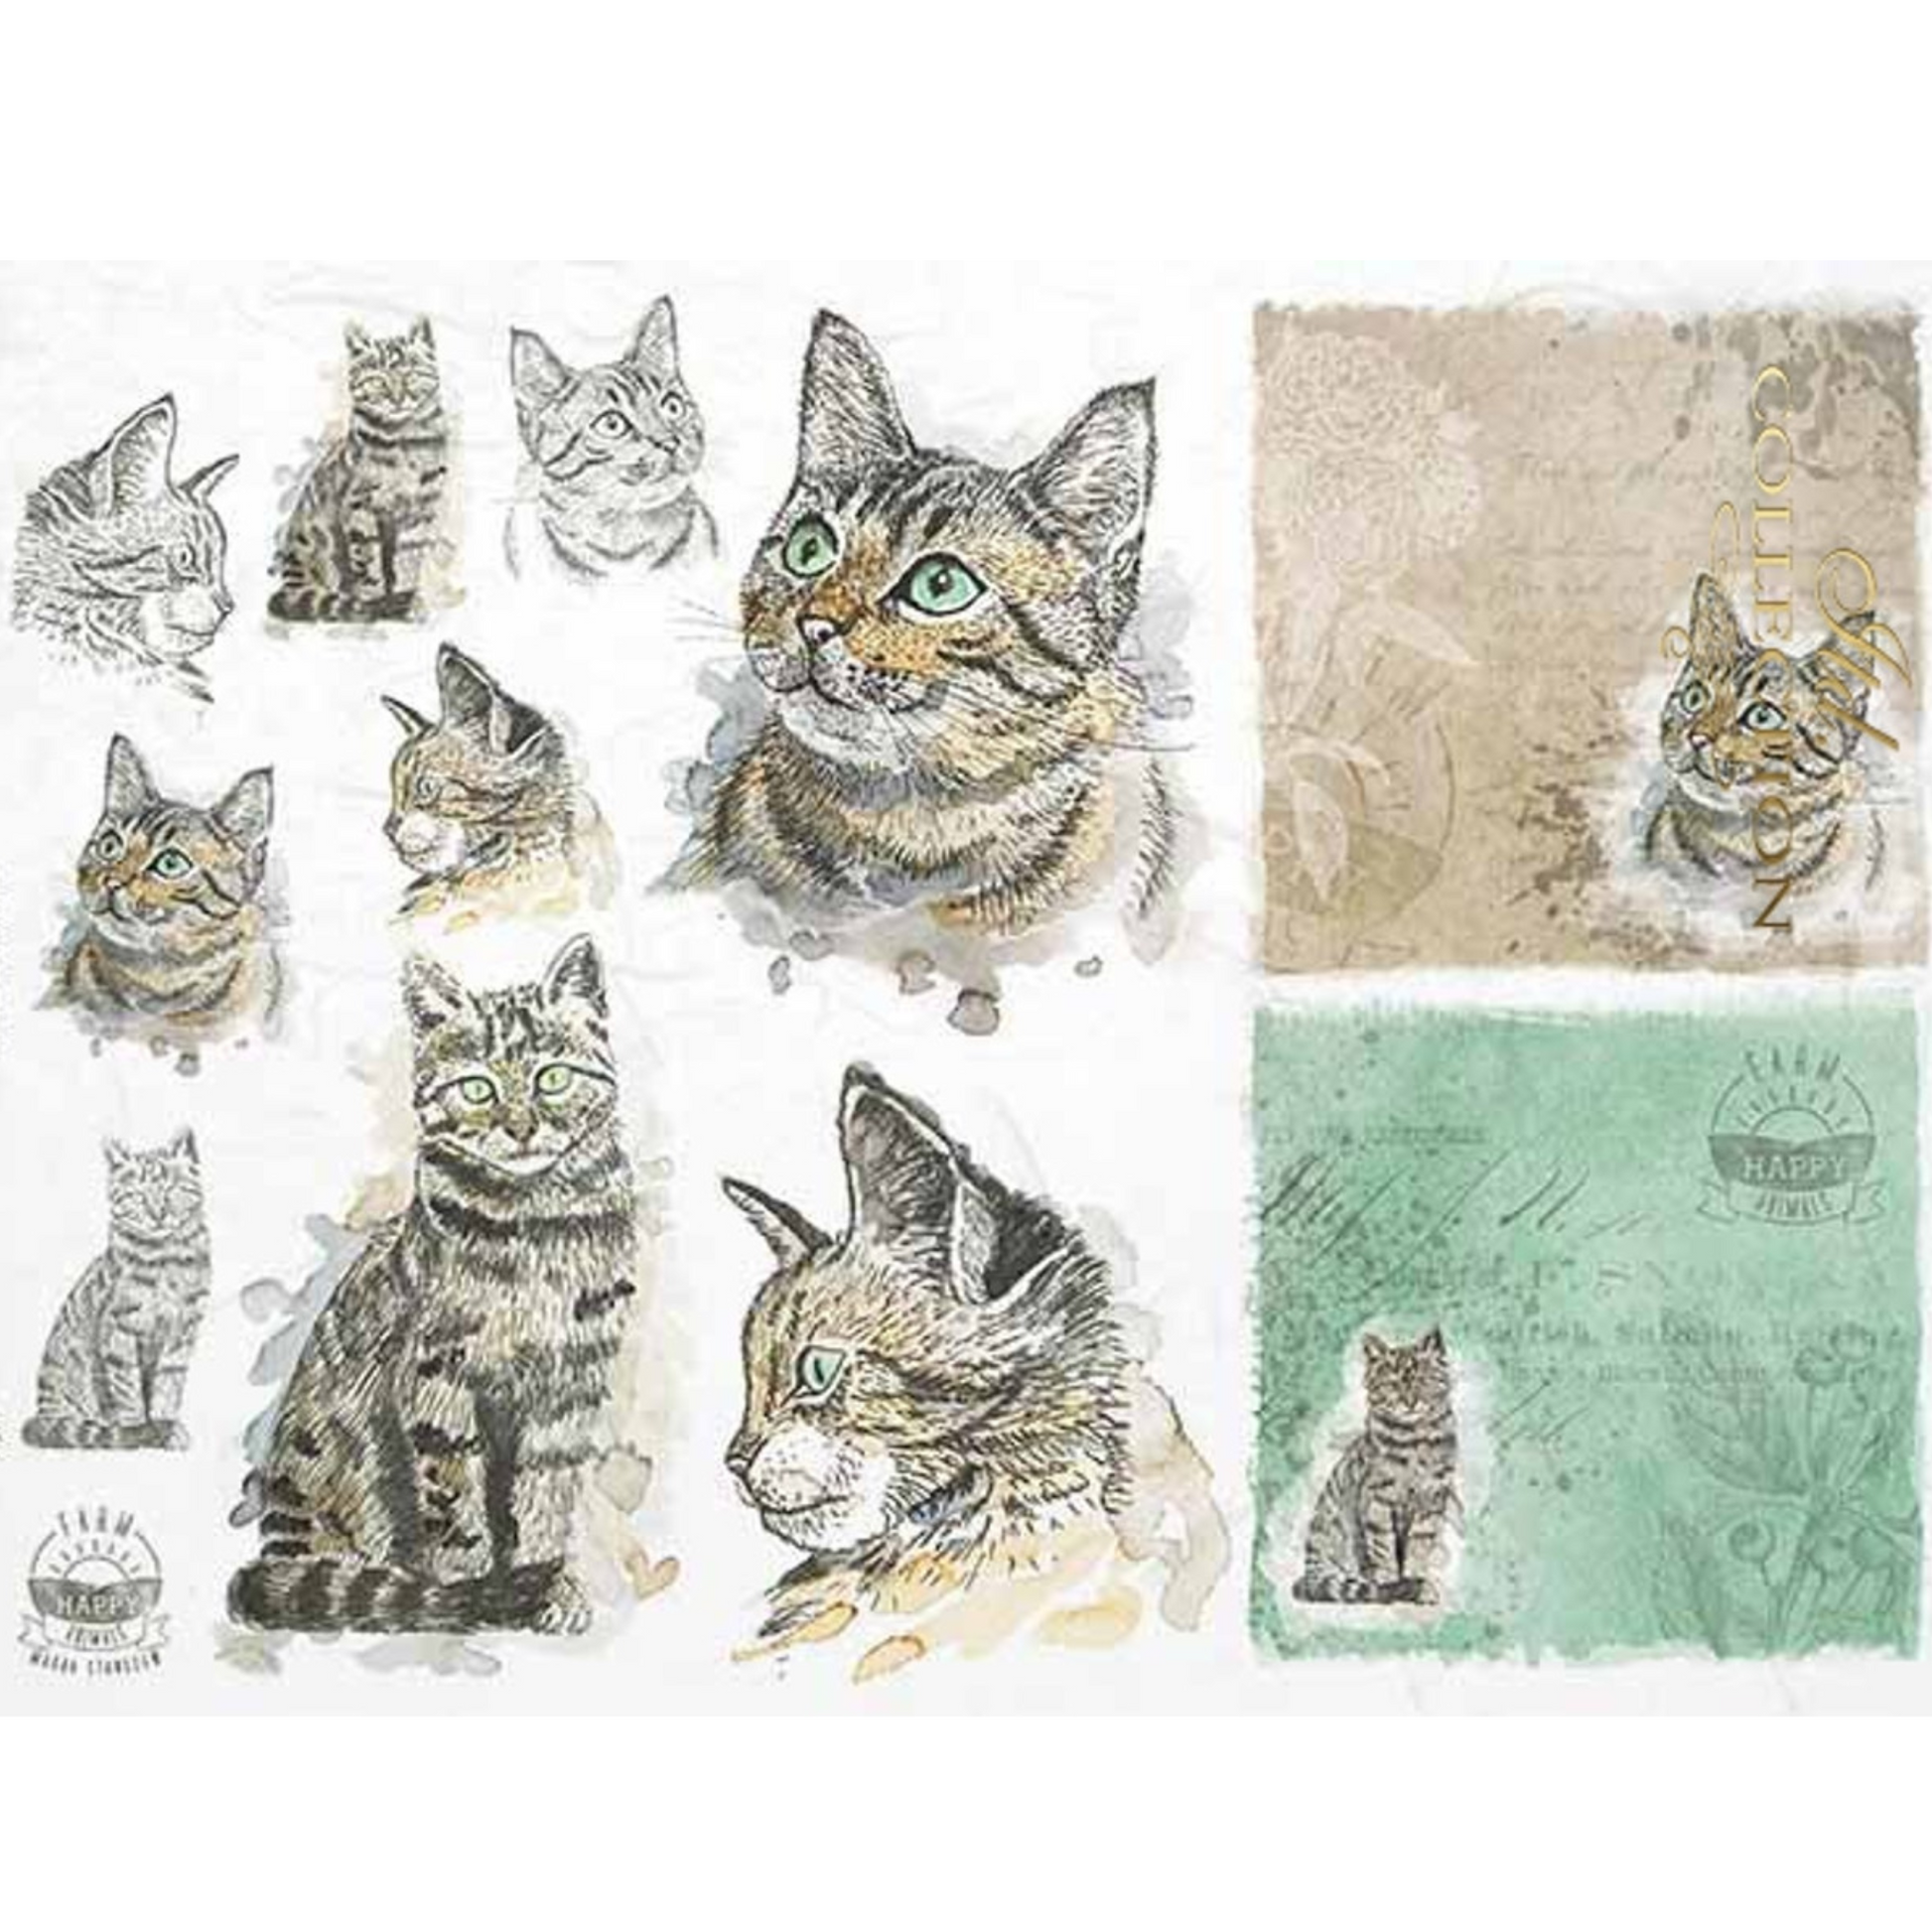 "Cat Portraits" decoupage rice paper by ITD Colleciton. Size A4 available at Milton's Daughter.